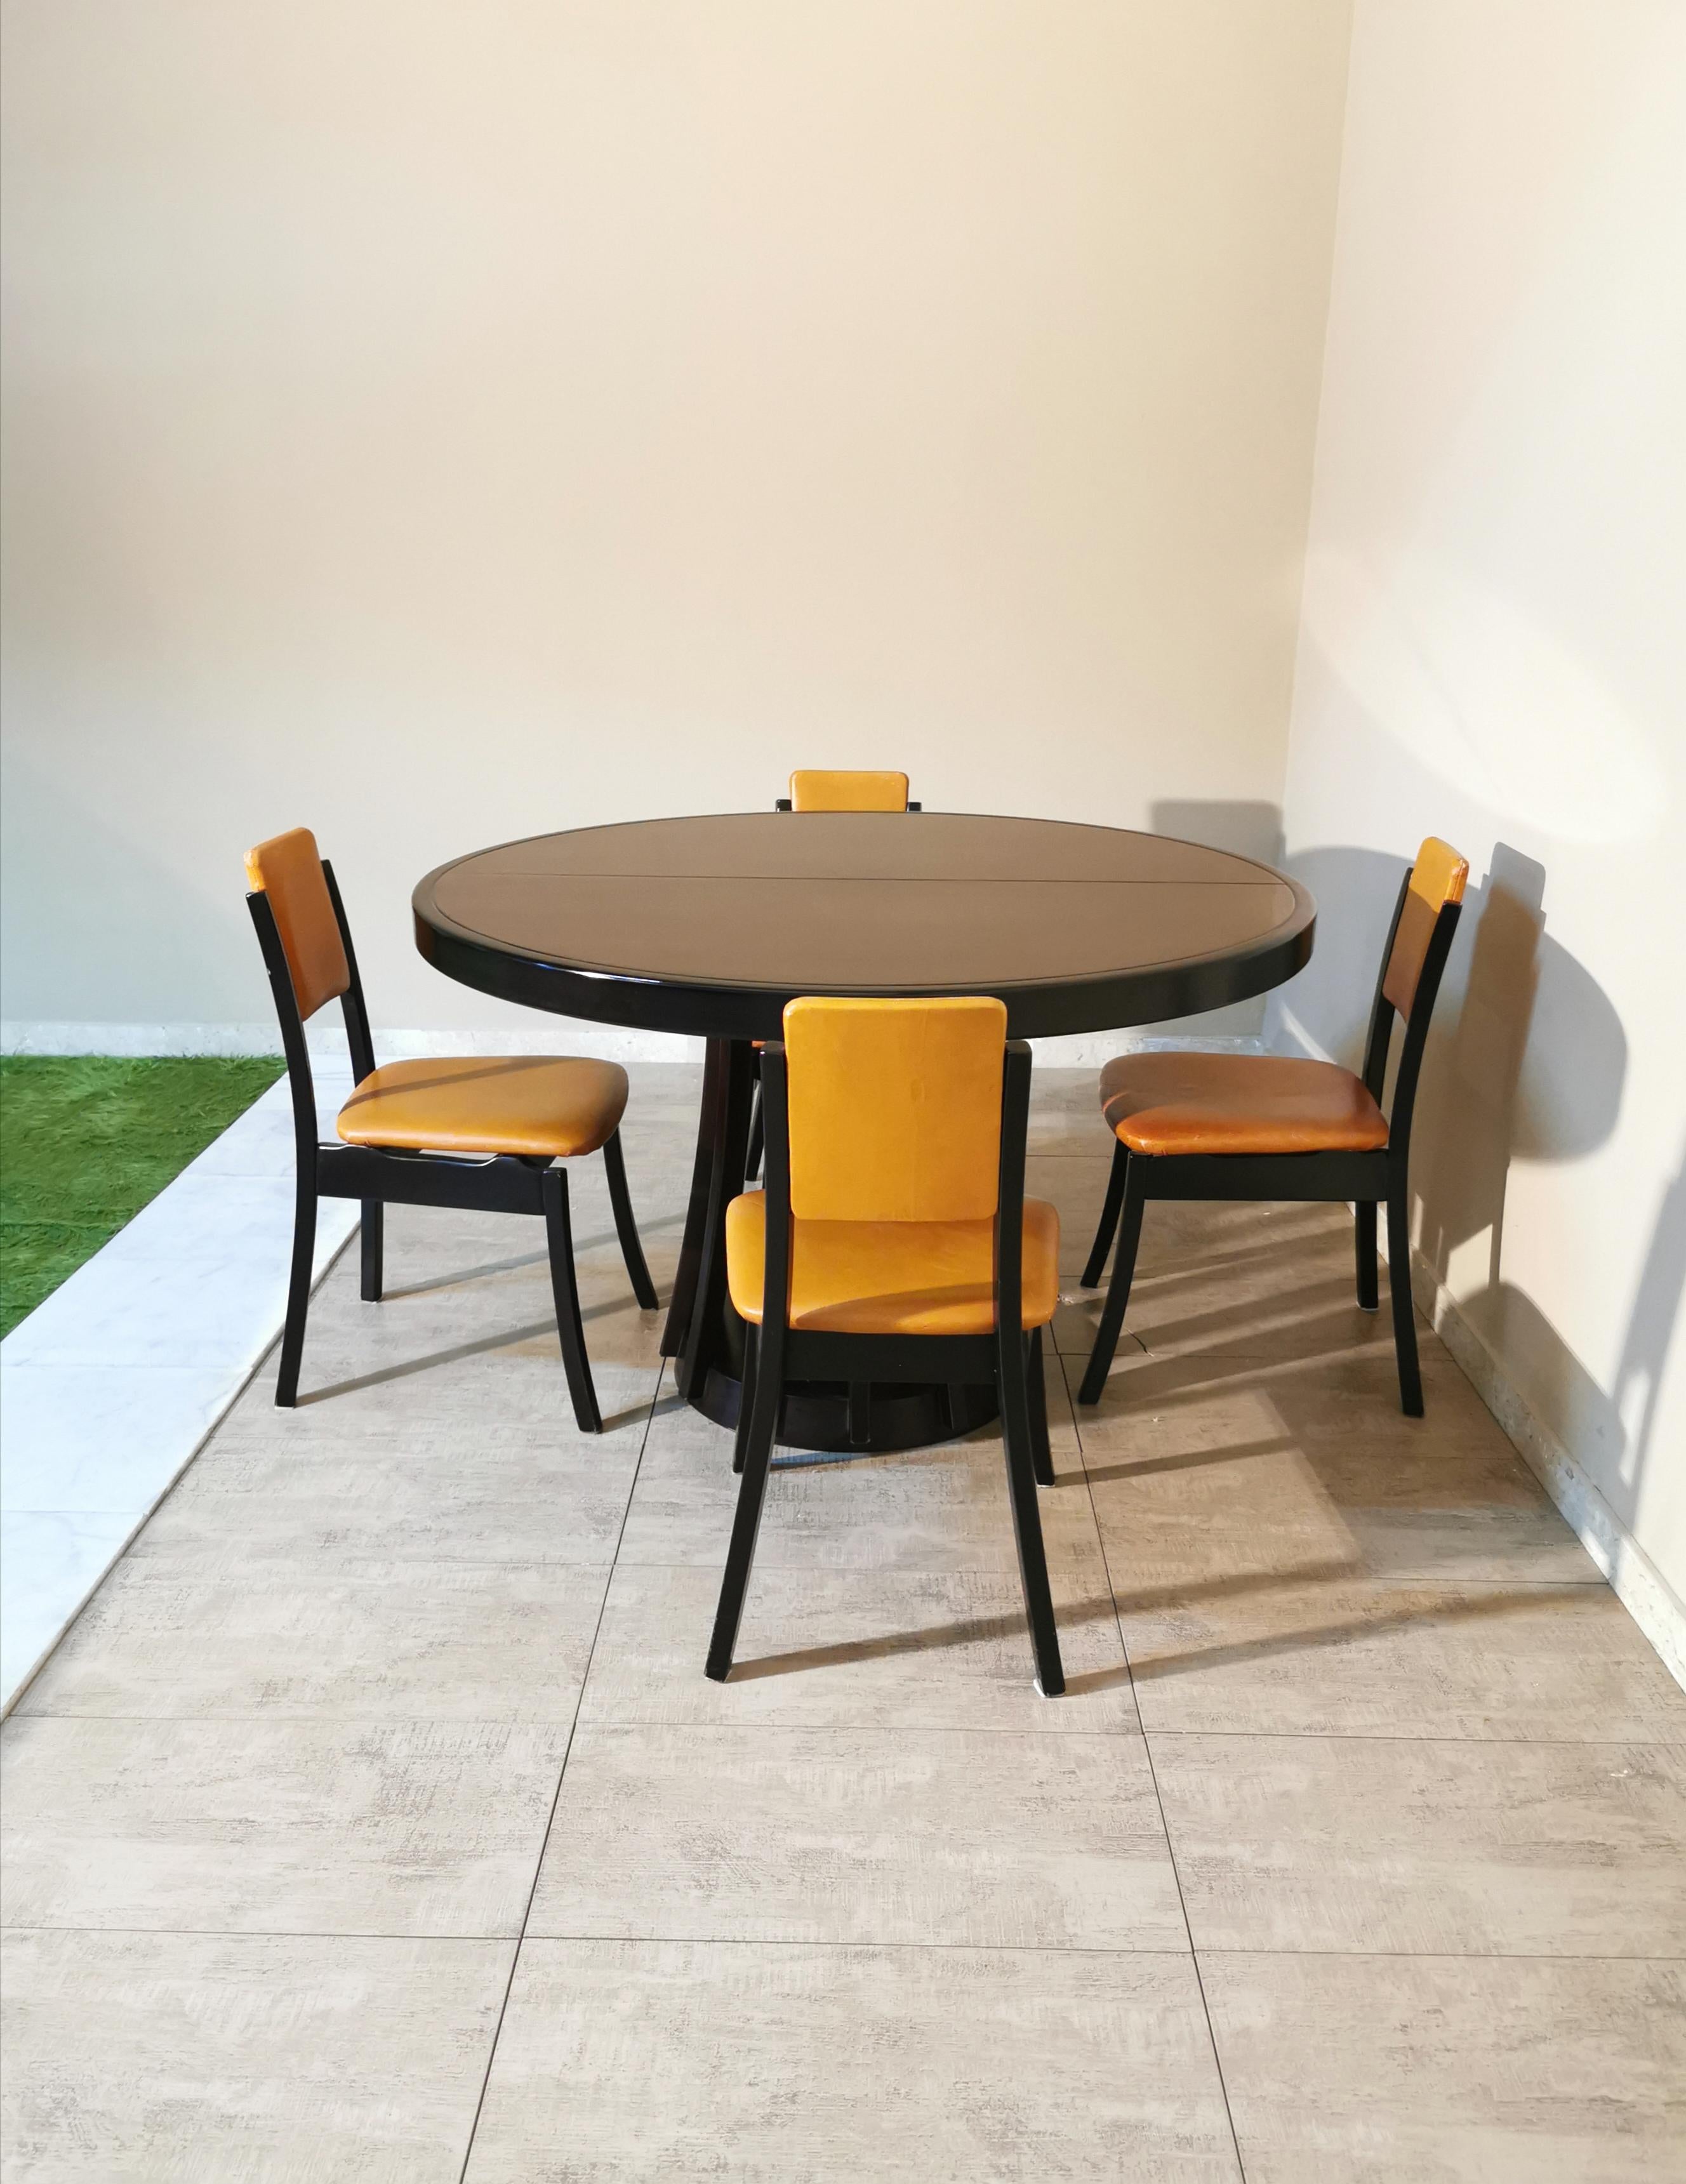 1970s dining table and chairs